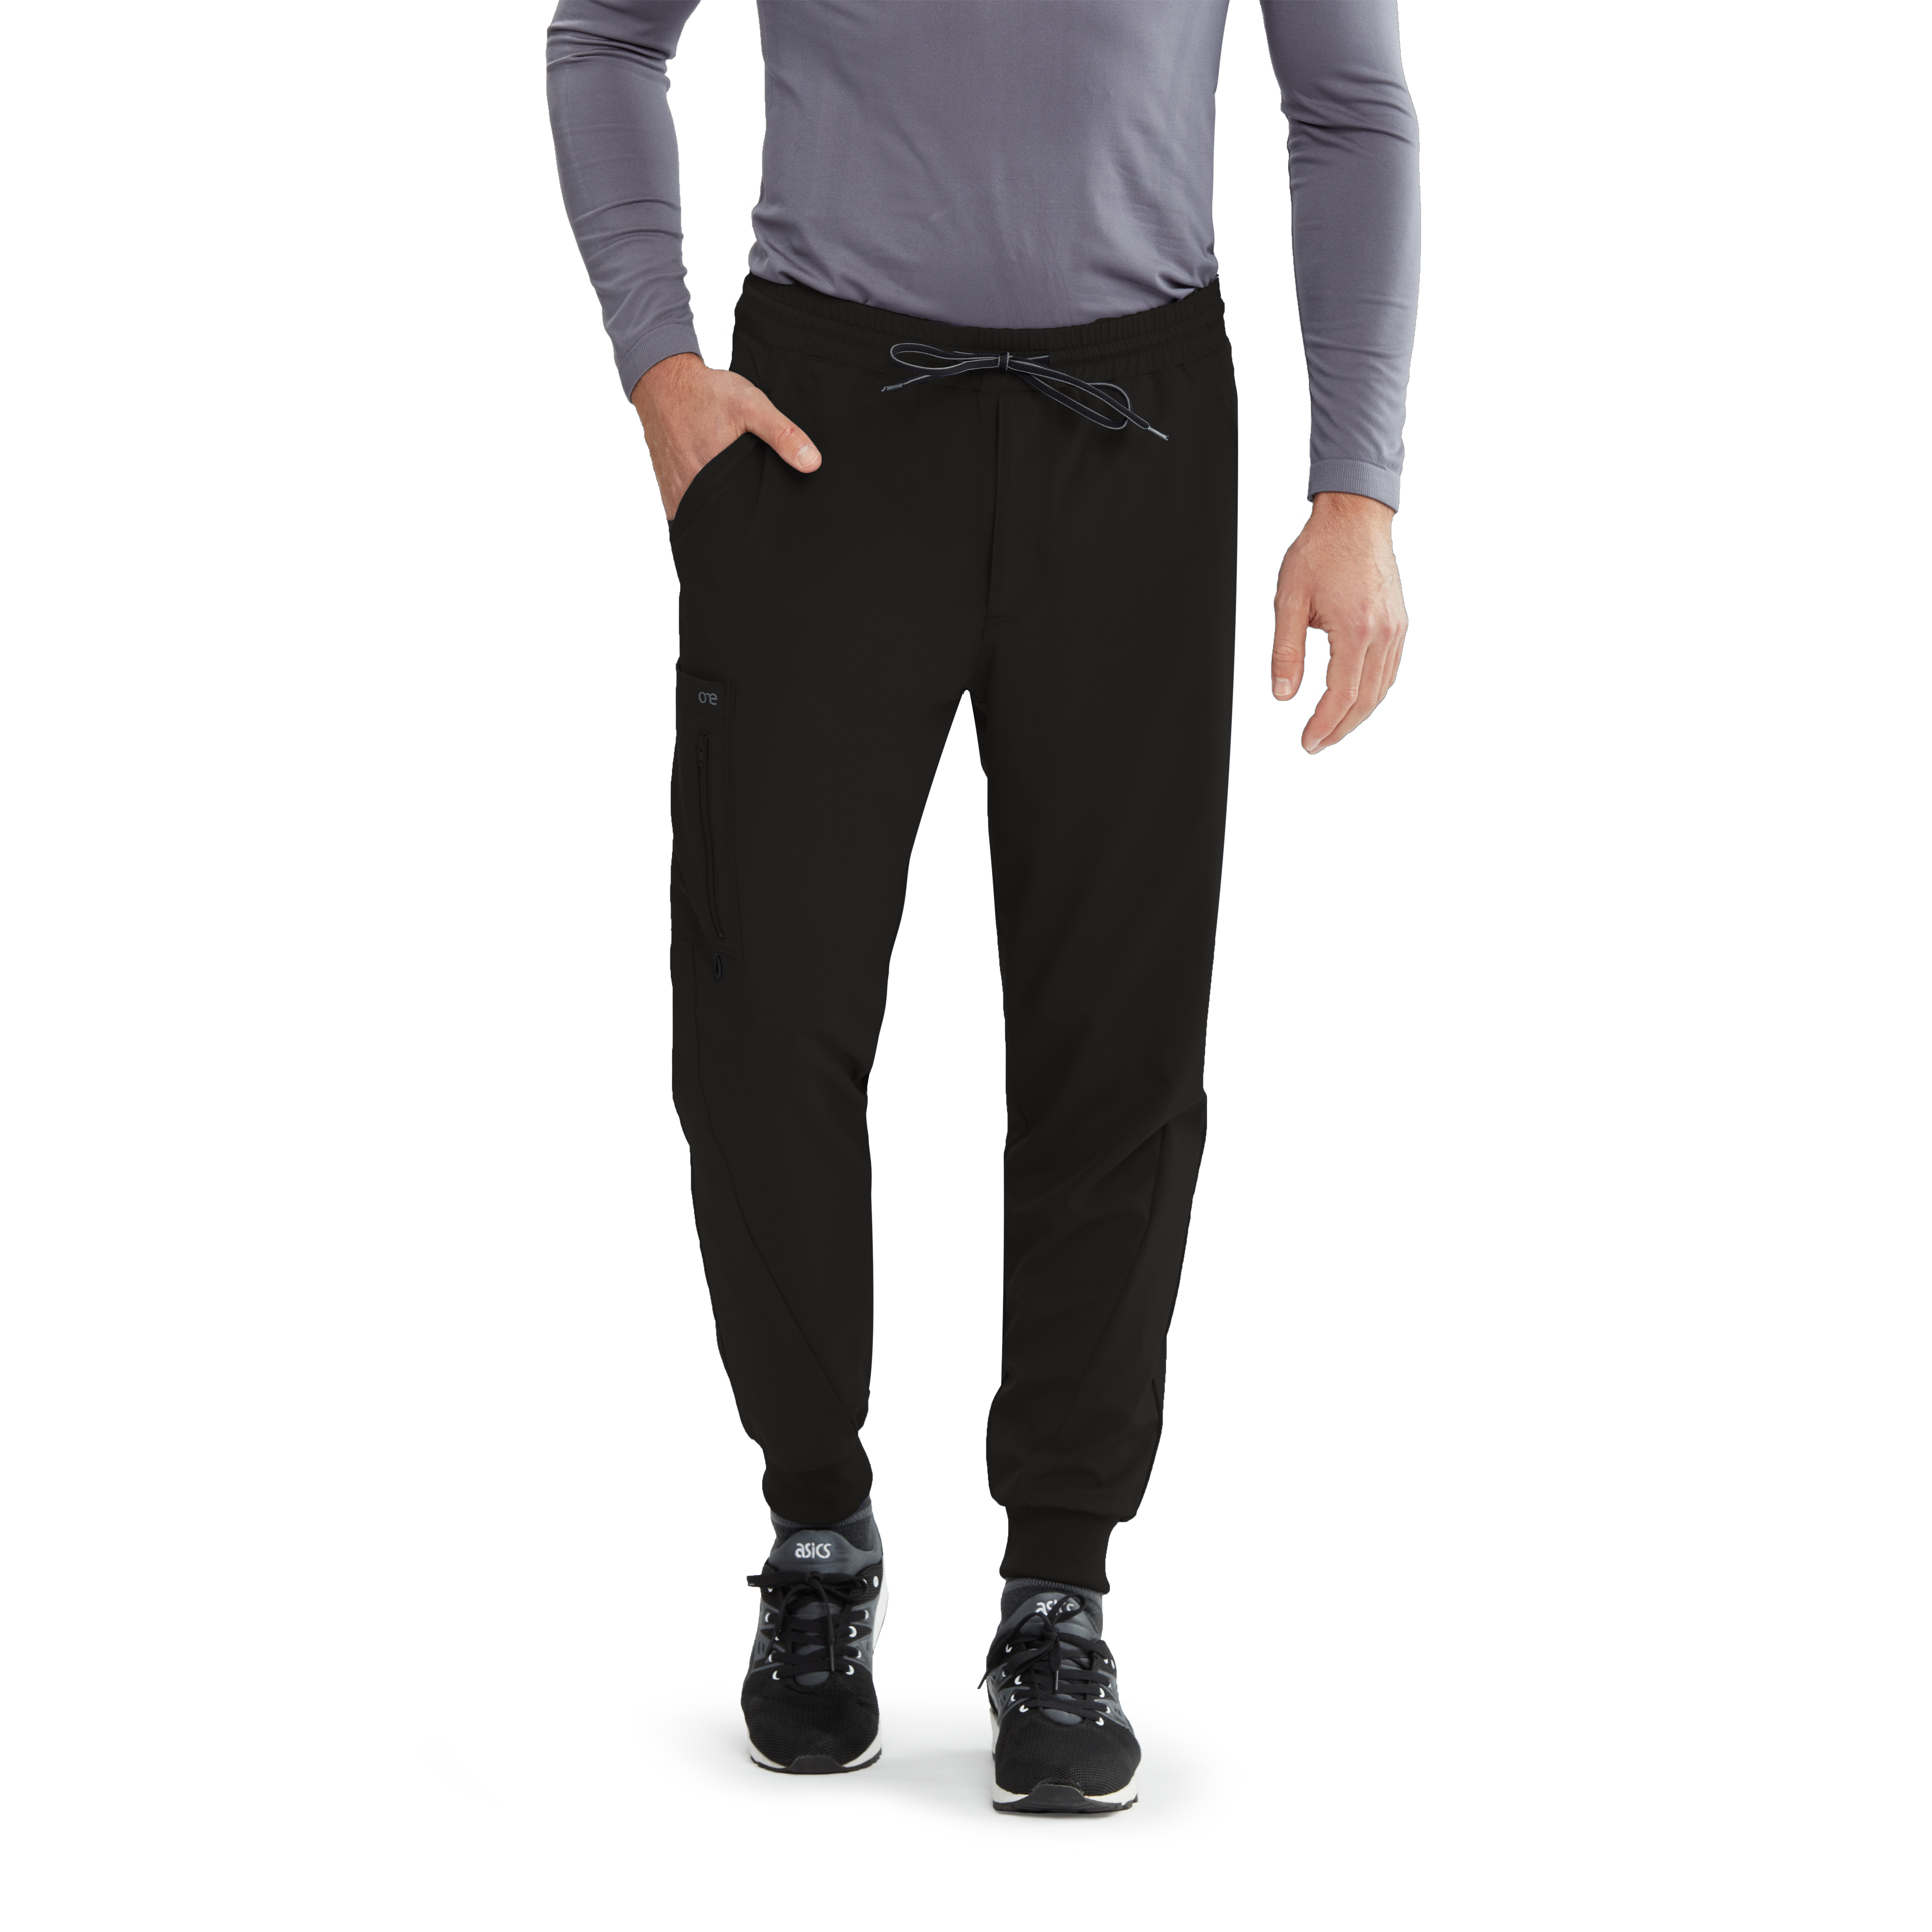 Barco One Bottoms for Medical 5pkt Elasticwaist Cargo Jogger-Barco One